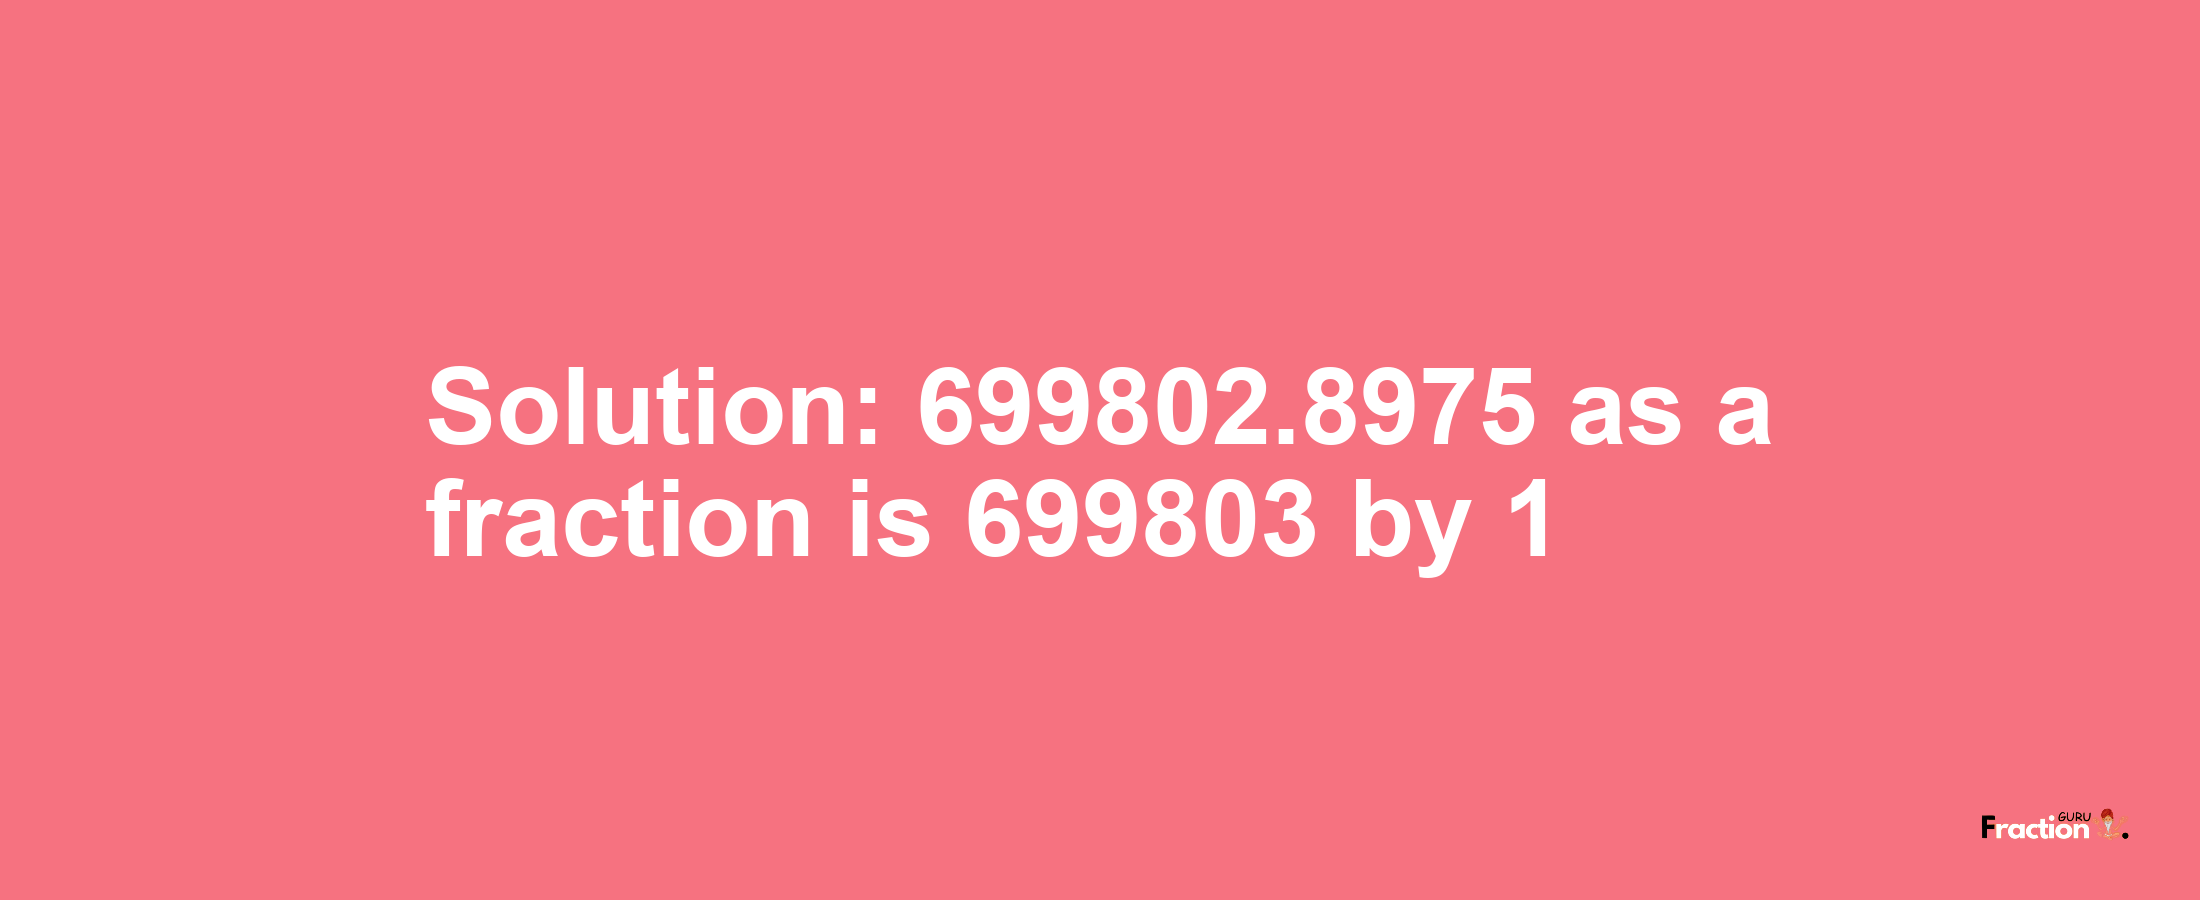 Solution:699802.8975 as a fraction is 699803/1